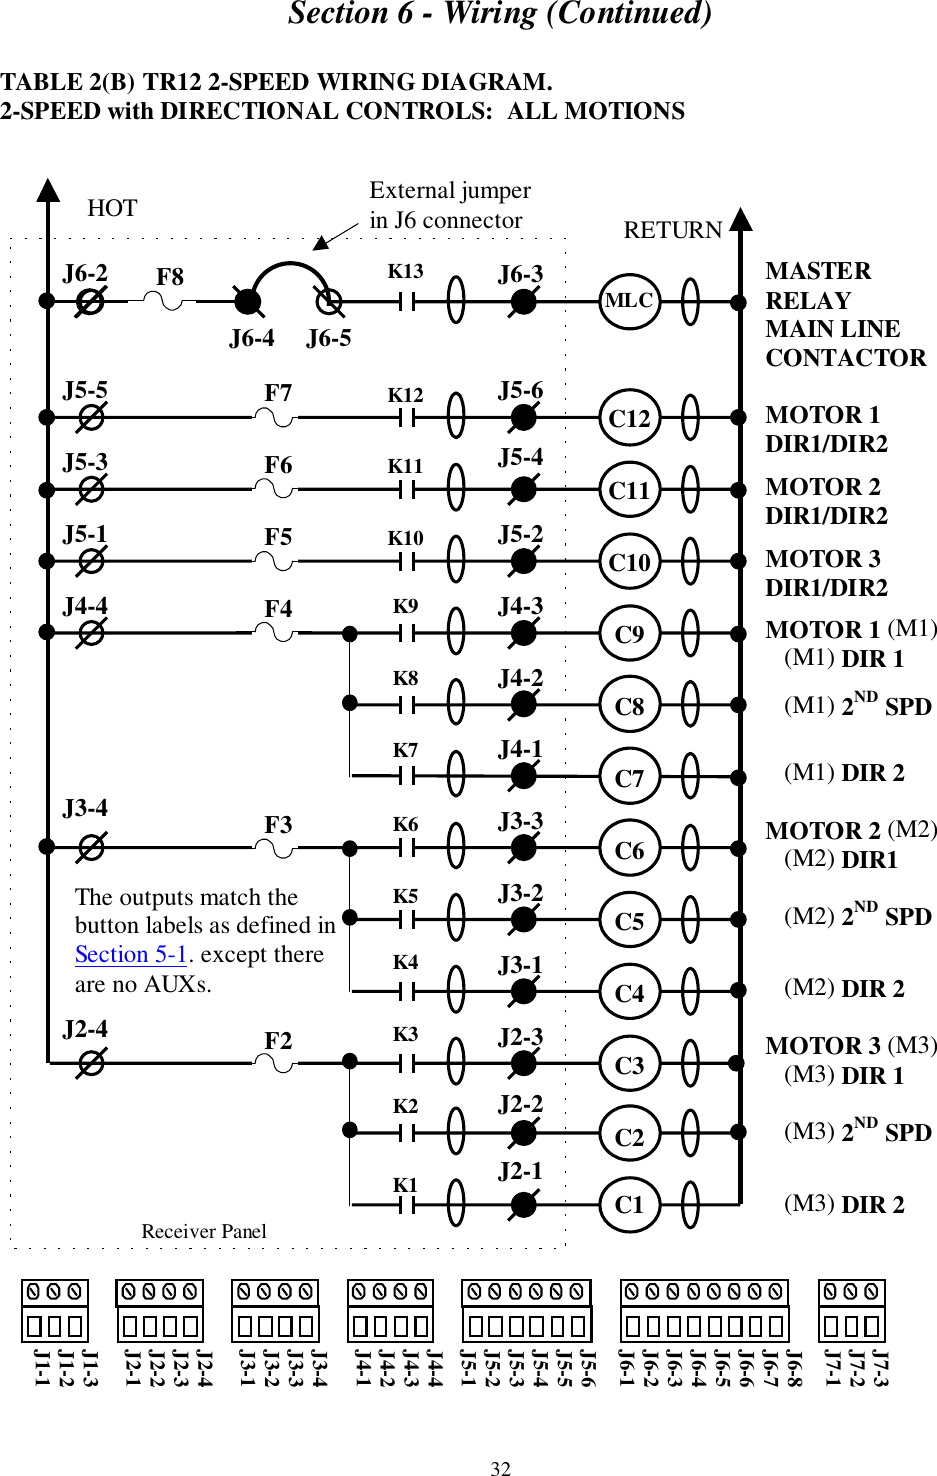 Section 6 - Wiring (Continued)32TABLE 2(B) TR12 2-SPEED WIRING DIAGRAM.2-SPEED with DIRECTIONAL CONTROLS:  ALL MOTIONSMASTERRELAYMAIN LINECONTACTORMOTOR 1DIR1/DIR2MOTOR 2DIR1/DIR2MOTOR 3DIR1/DIR2MOTOR 1 (M1)   (M1) DIR 1   (M1) 2ND SPD   (M1) DIR 2MOTOR 2 (M2)   (M2) DIR1   (M2) 2ND SPD   (M2) DIR 2MOTOR 3 (M3)   (M3) DIR 1   (M3) 2ND SPD   (M3) DIR 2     Receiver PanelJ6-2J5-5J5-3J5-1J4-4J3-4J2-4J6-3J5-6J5-4J5-2J4-3J4-2J4-1J3-3J3-2J3-1J2-3J2-2J2-1HOT RETURNK13K12K11K10K9K8K7K6K5K4K3K2K1MLCC12C11C10C9C8C7C6C5C4C3C2C1F7F6F5F4F3F2J7-3J7-2J7-1J6-8J6-7J6-6J6-5J6-4J6-3J6-2J6-1J5-6J5-5J5-4J5-3J5-2J5-1J4-4J4-3J4-2J4-1J3-4J3-3J3-2J3-1J2-4J2-3J2-2J2-1J1-3J1-2J1-1External jumperin J6 connectorJ6-4     J6-5F8The outputs match thebutton labels as defined inSection 5-1. except thereare no AUXs.